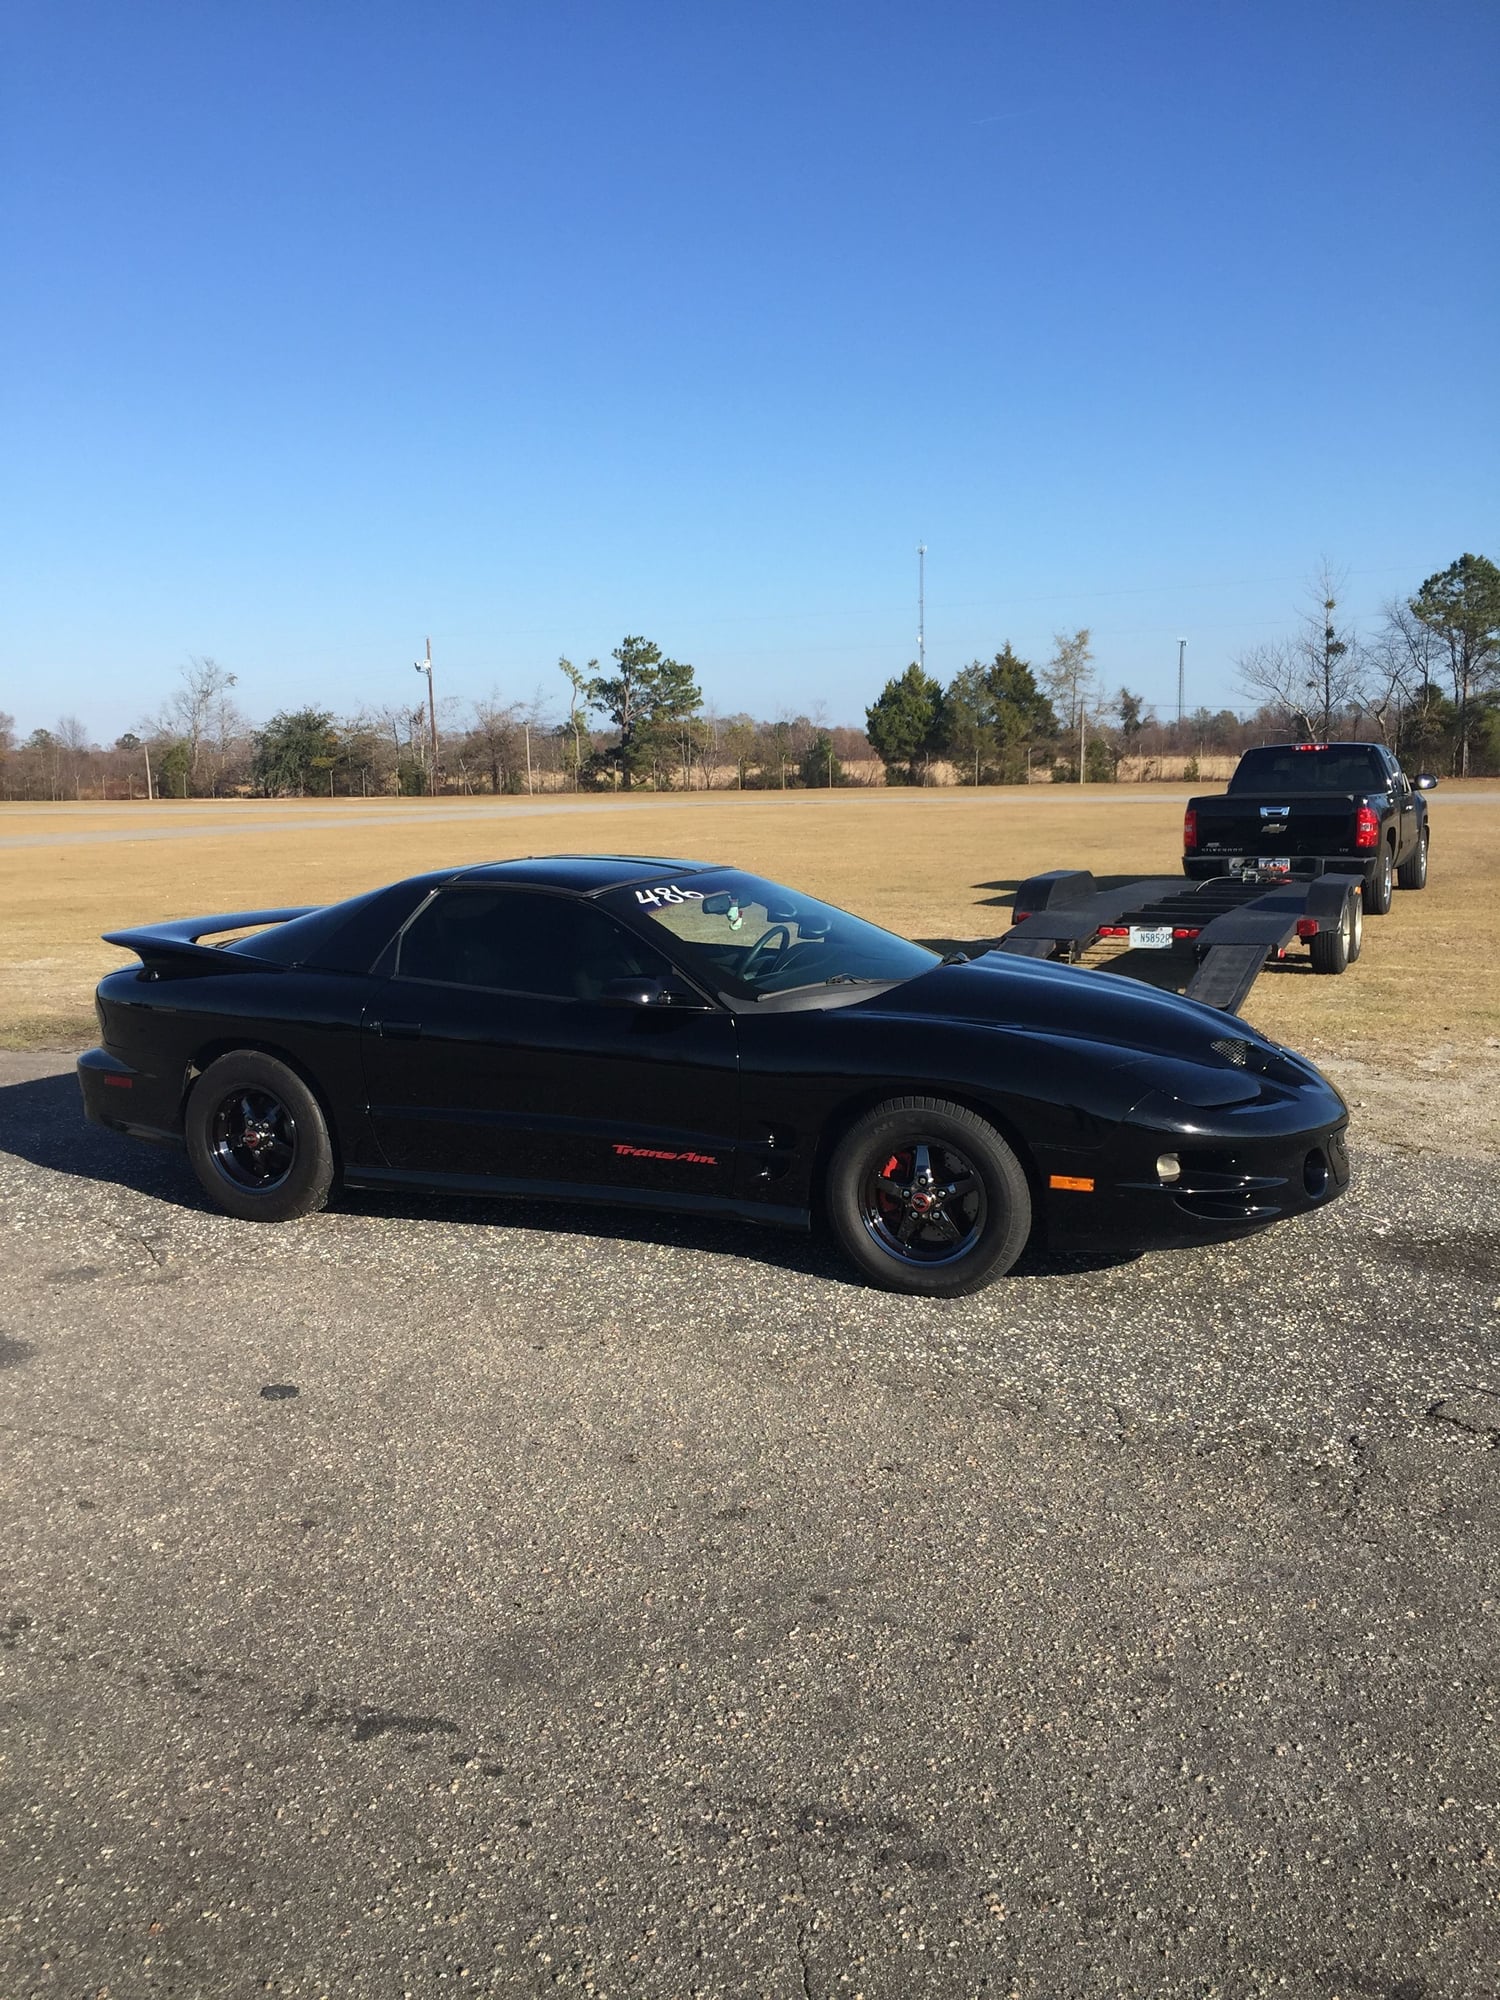 1998 Pontiac Firebird - 98 Trans-Am Roller/ 383 Long block and Powerglide - Used - VIN 2G2FV22GXW2201322 - 99,909 Miles - 8 cyl - 2WD - Automatic - Coupe - Black - Lucedale, MS 39452, United States